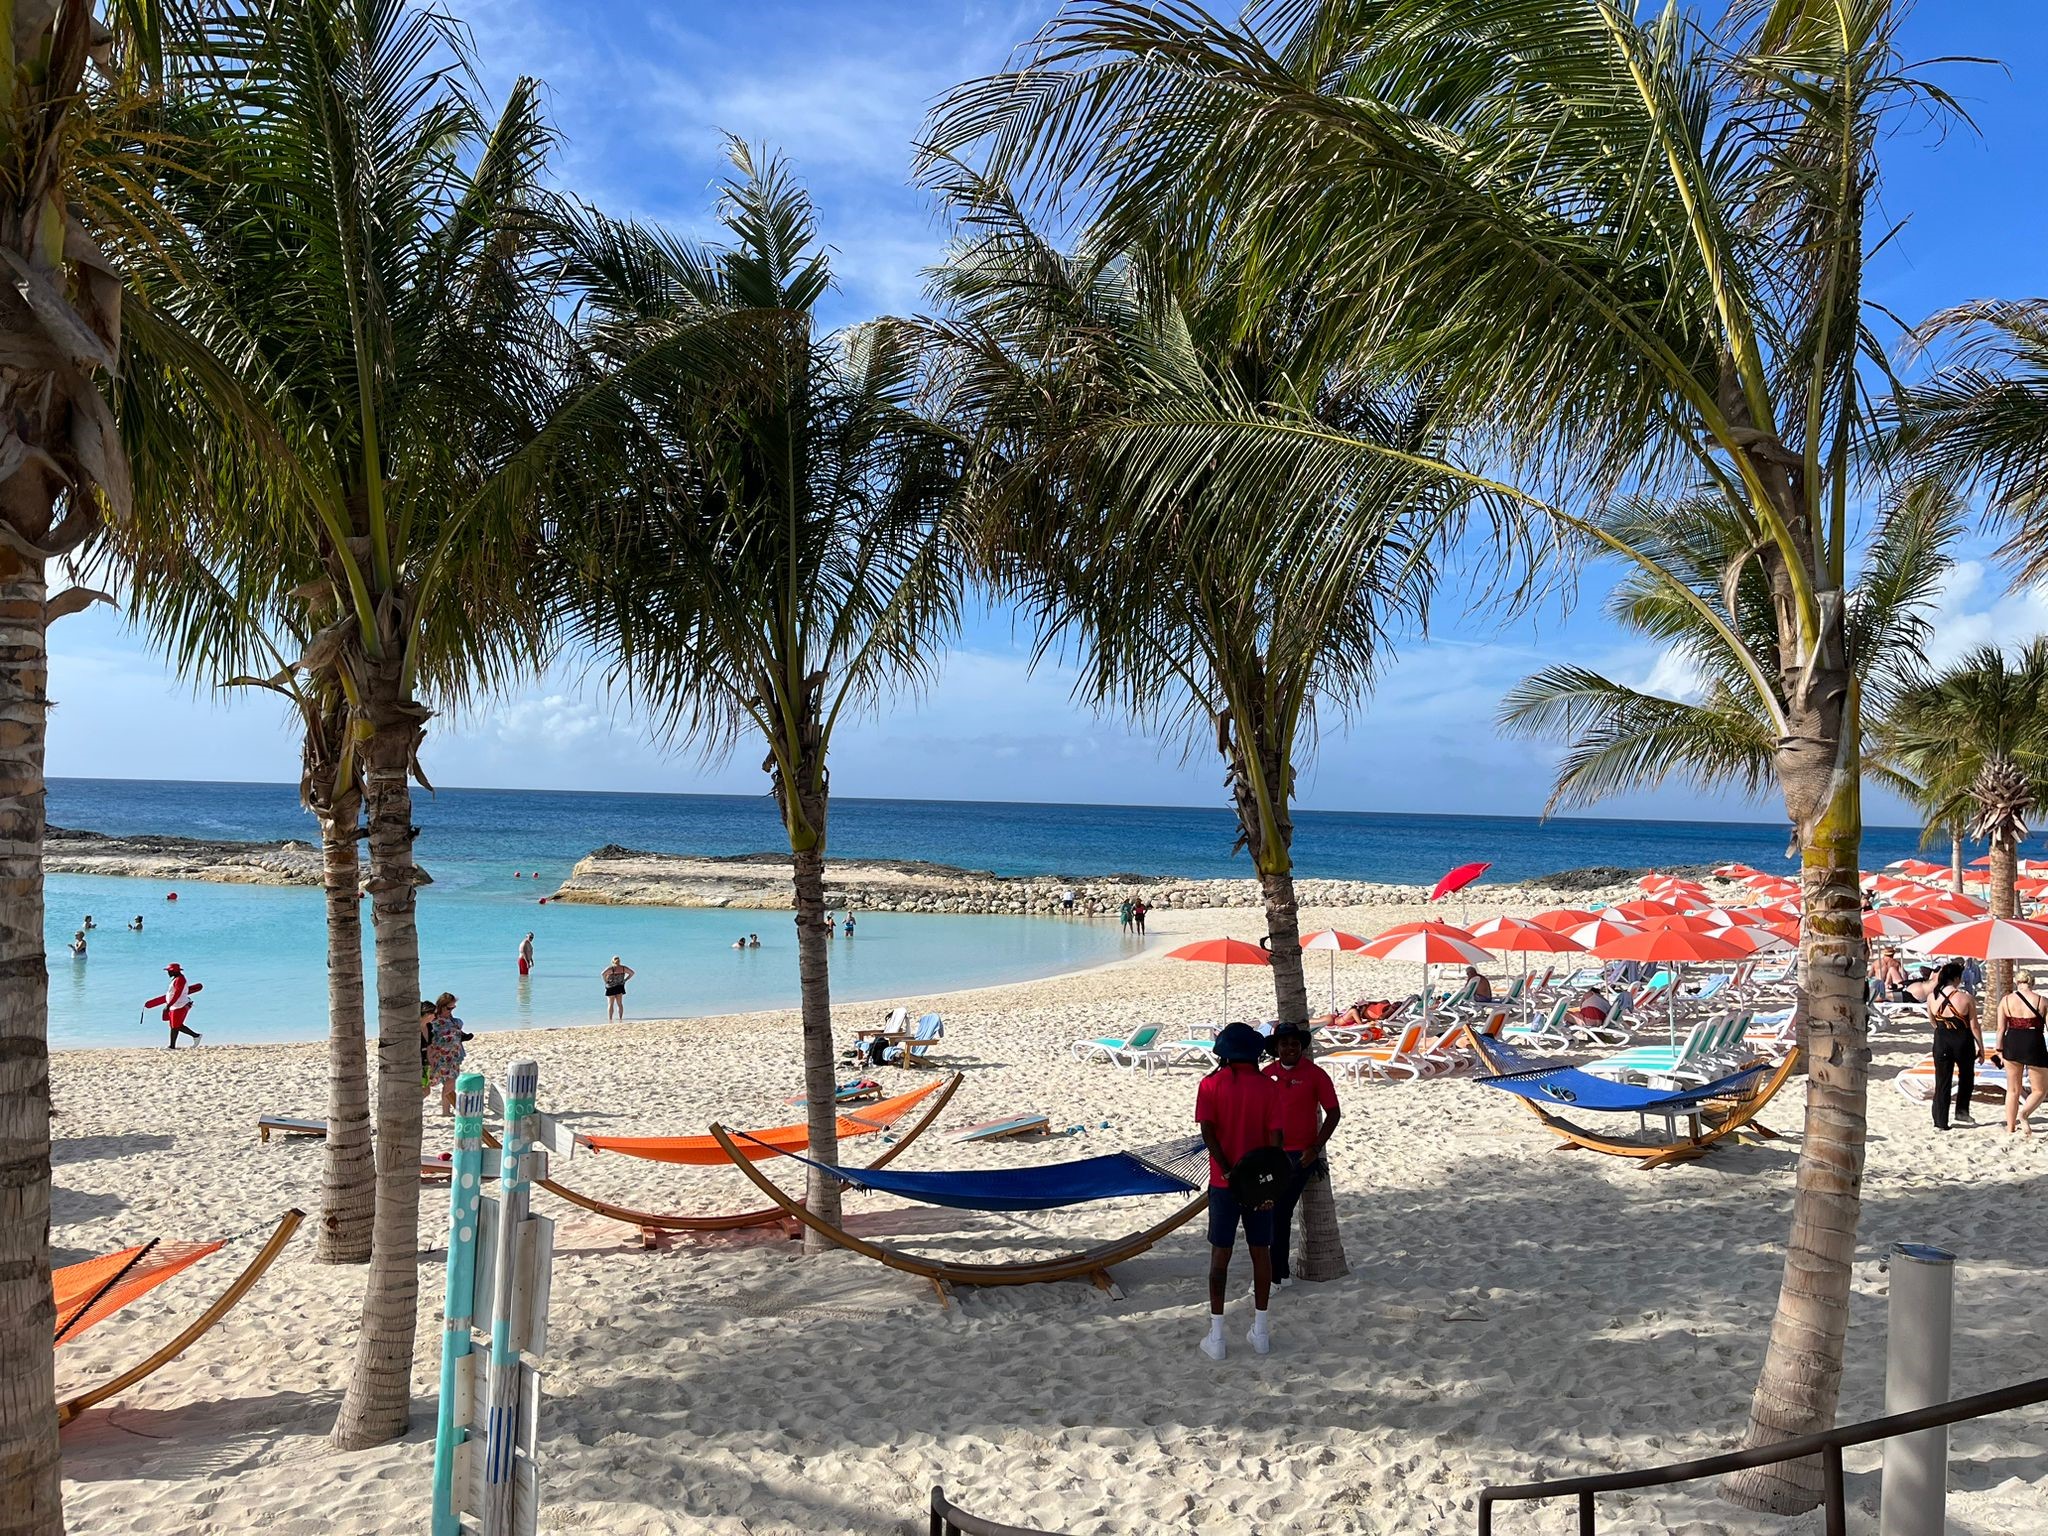 Royal Caribbean's private adult-only beach at the Hideaway in CocoCay, Bahamas (PA)